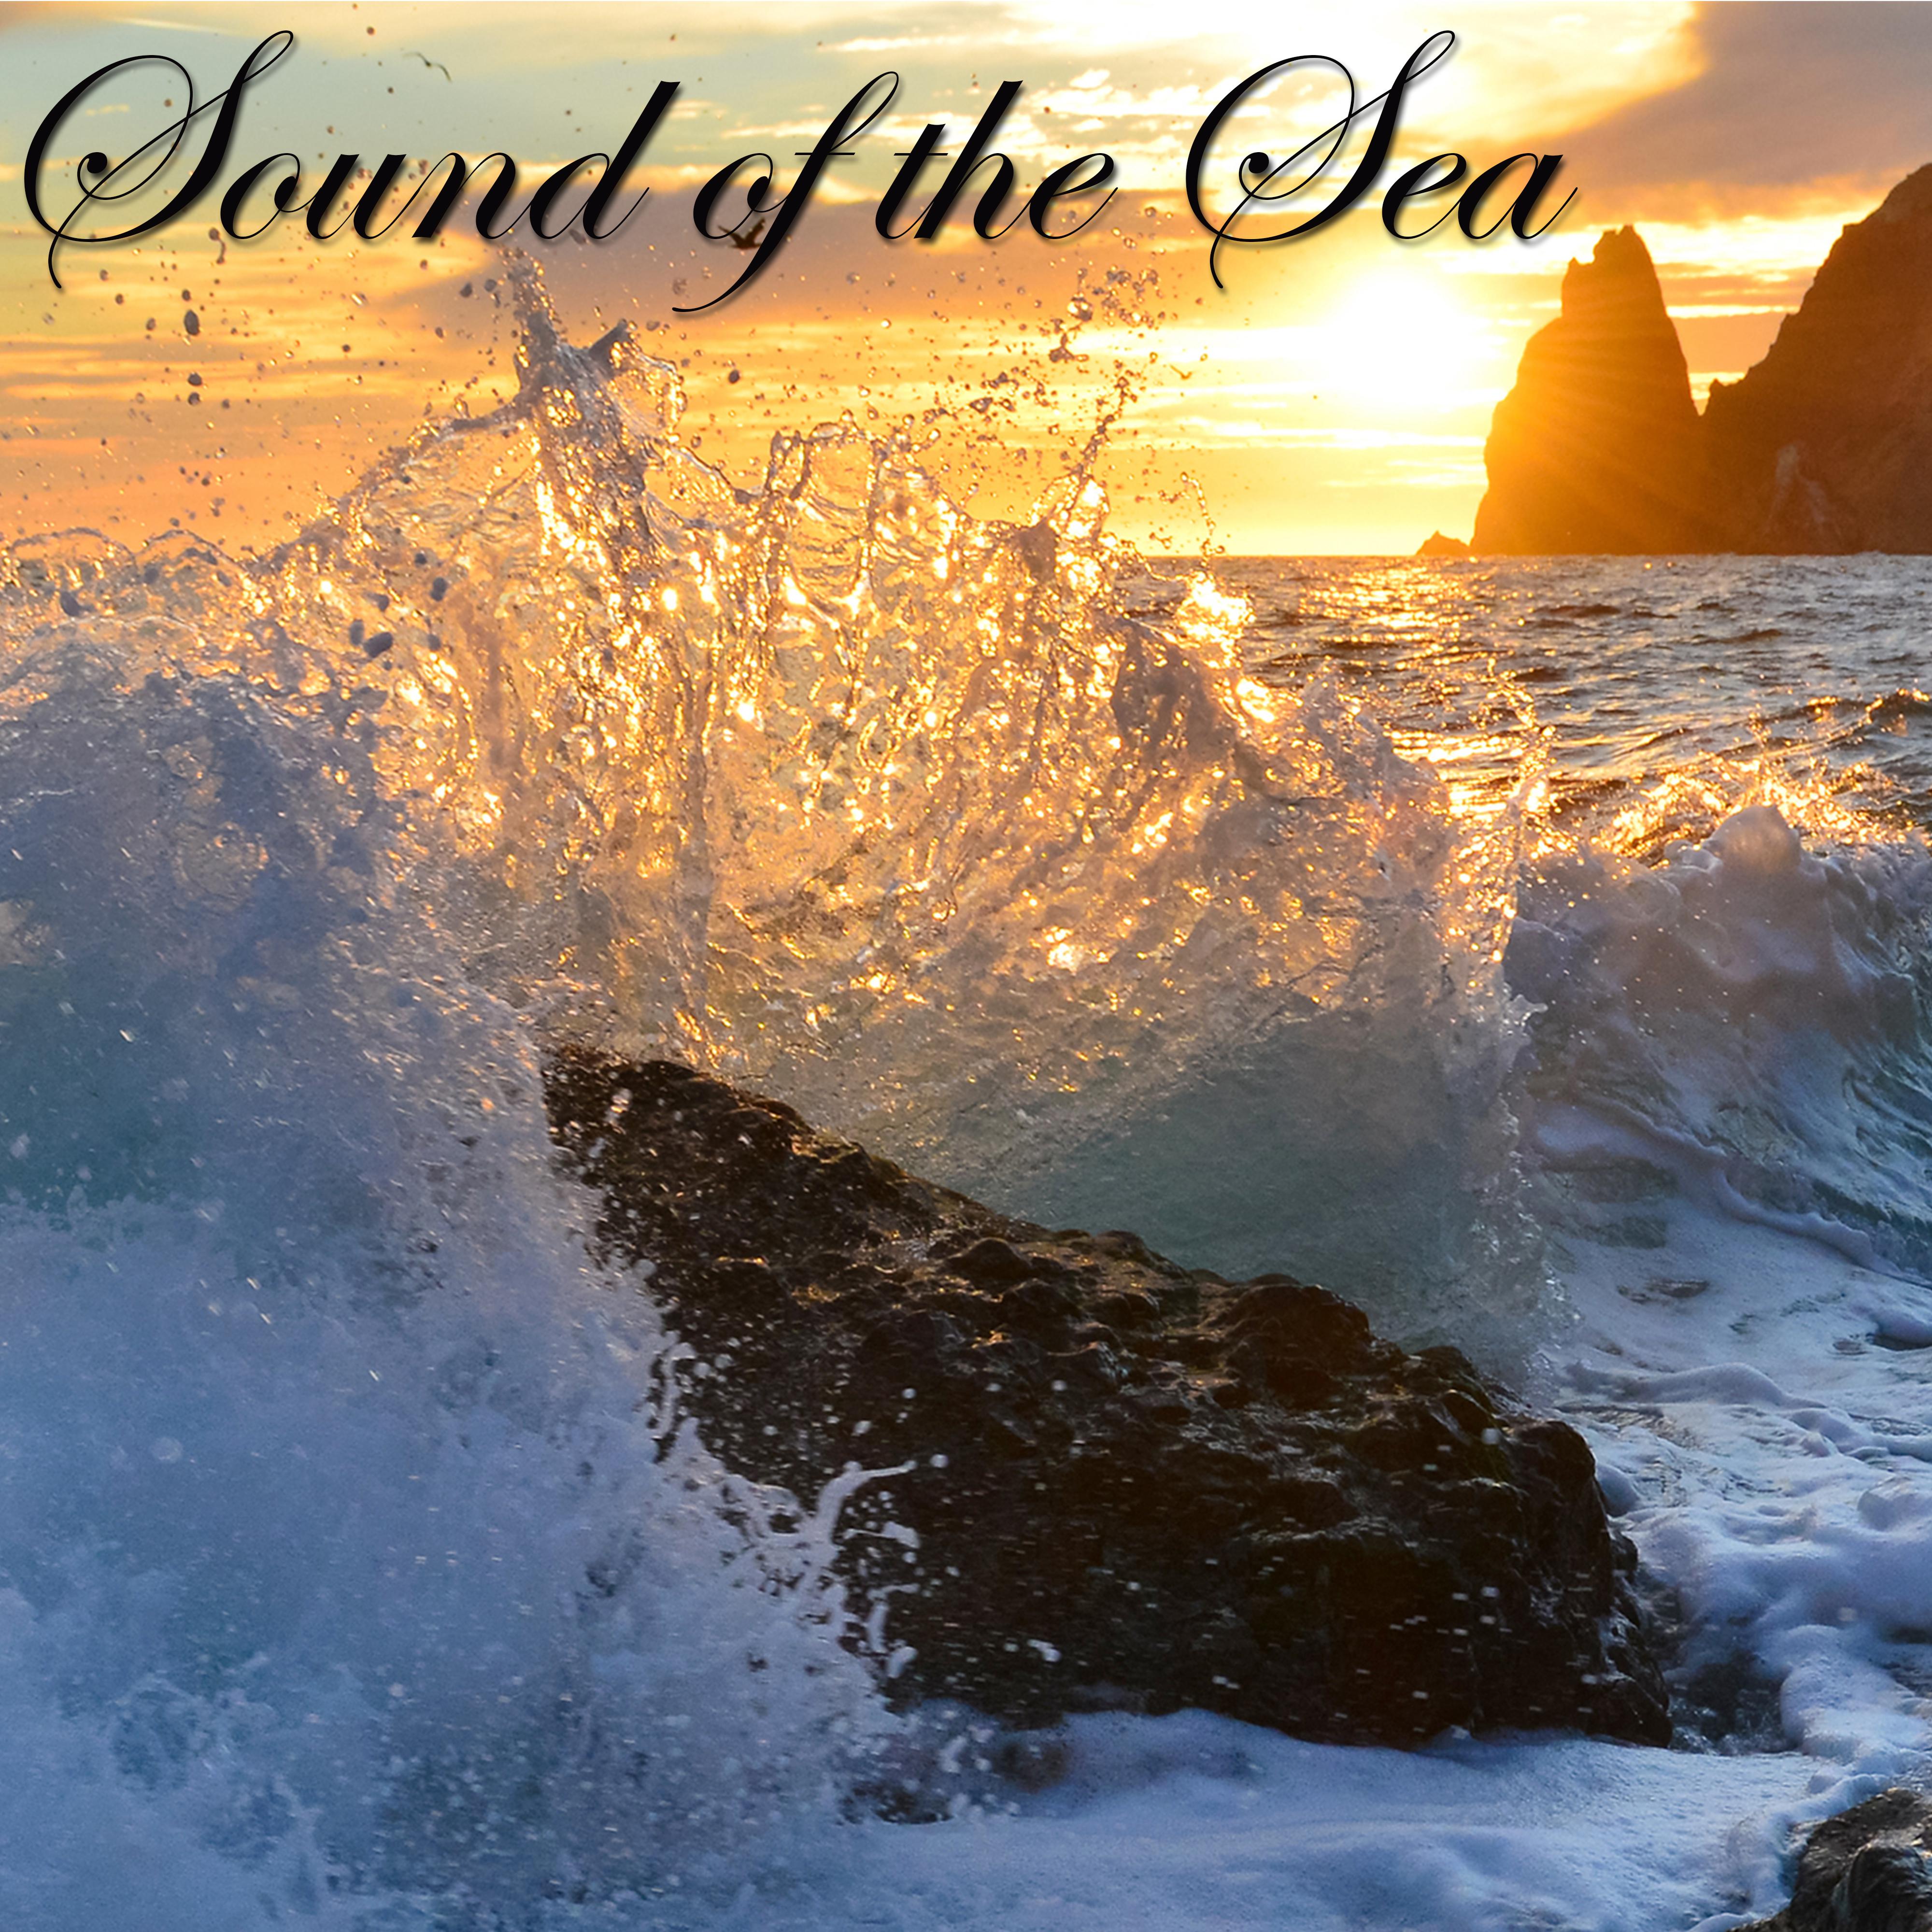 Sound of the Sea – New Age Amazing Music with Sea & Ocean Waves Relaxing Nature Sounds